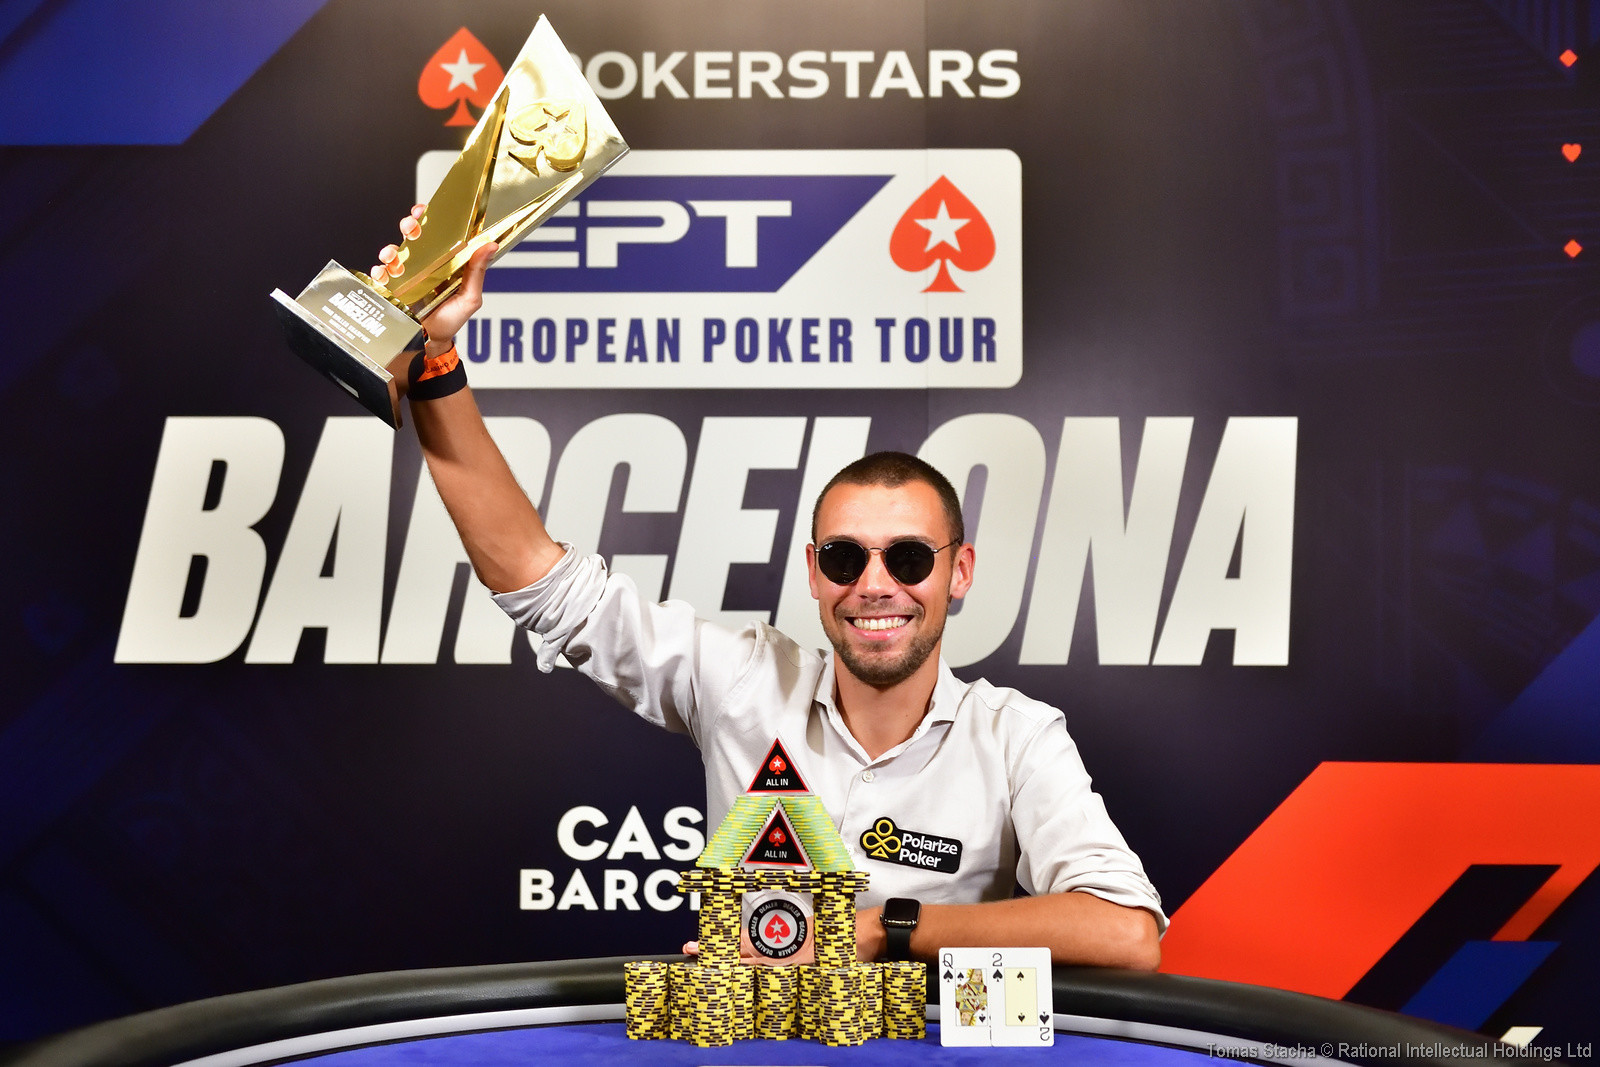 Portugal’s Rui Ferreira Takes Down €10,300 EPT High Roller for €767,750